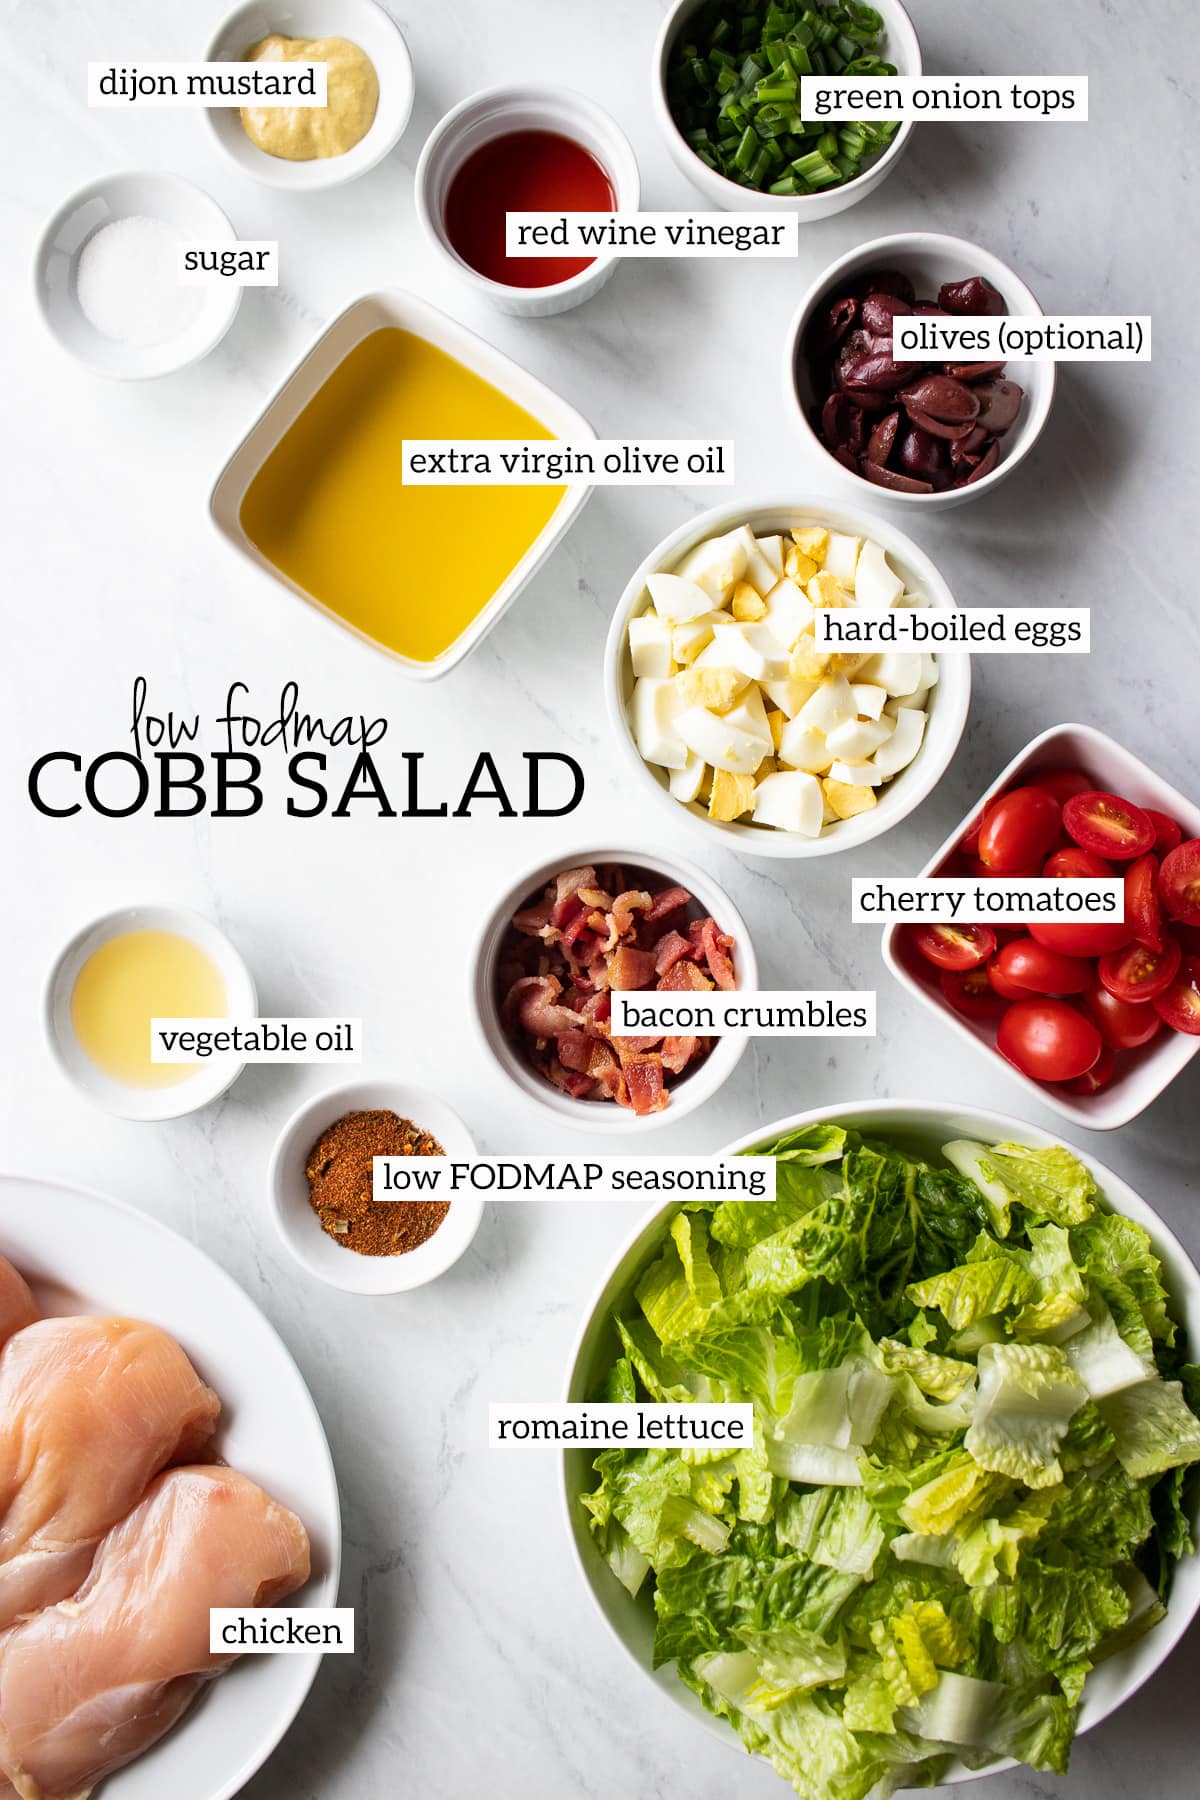 Ingredients needed for Low FODMAP Cobb Salad are measured out into individual white dishes.